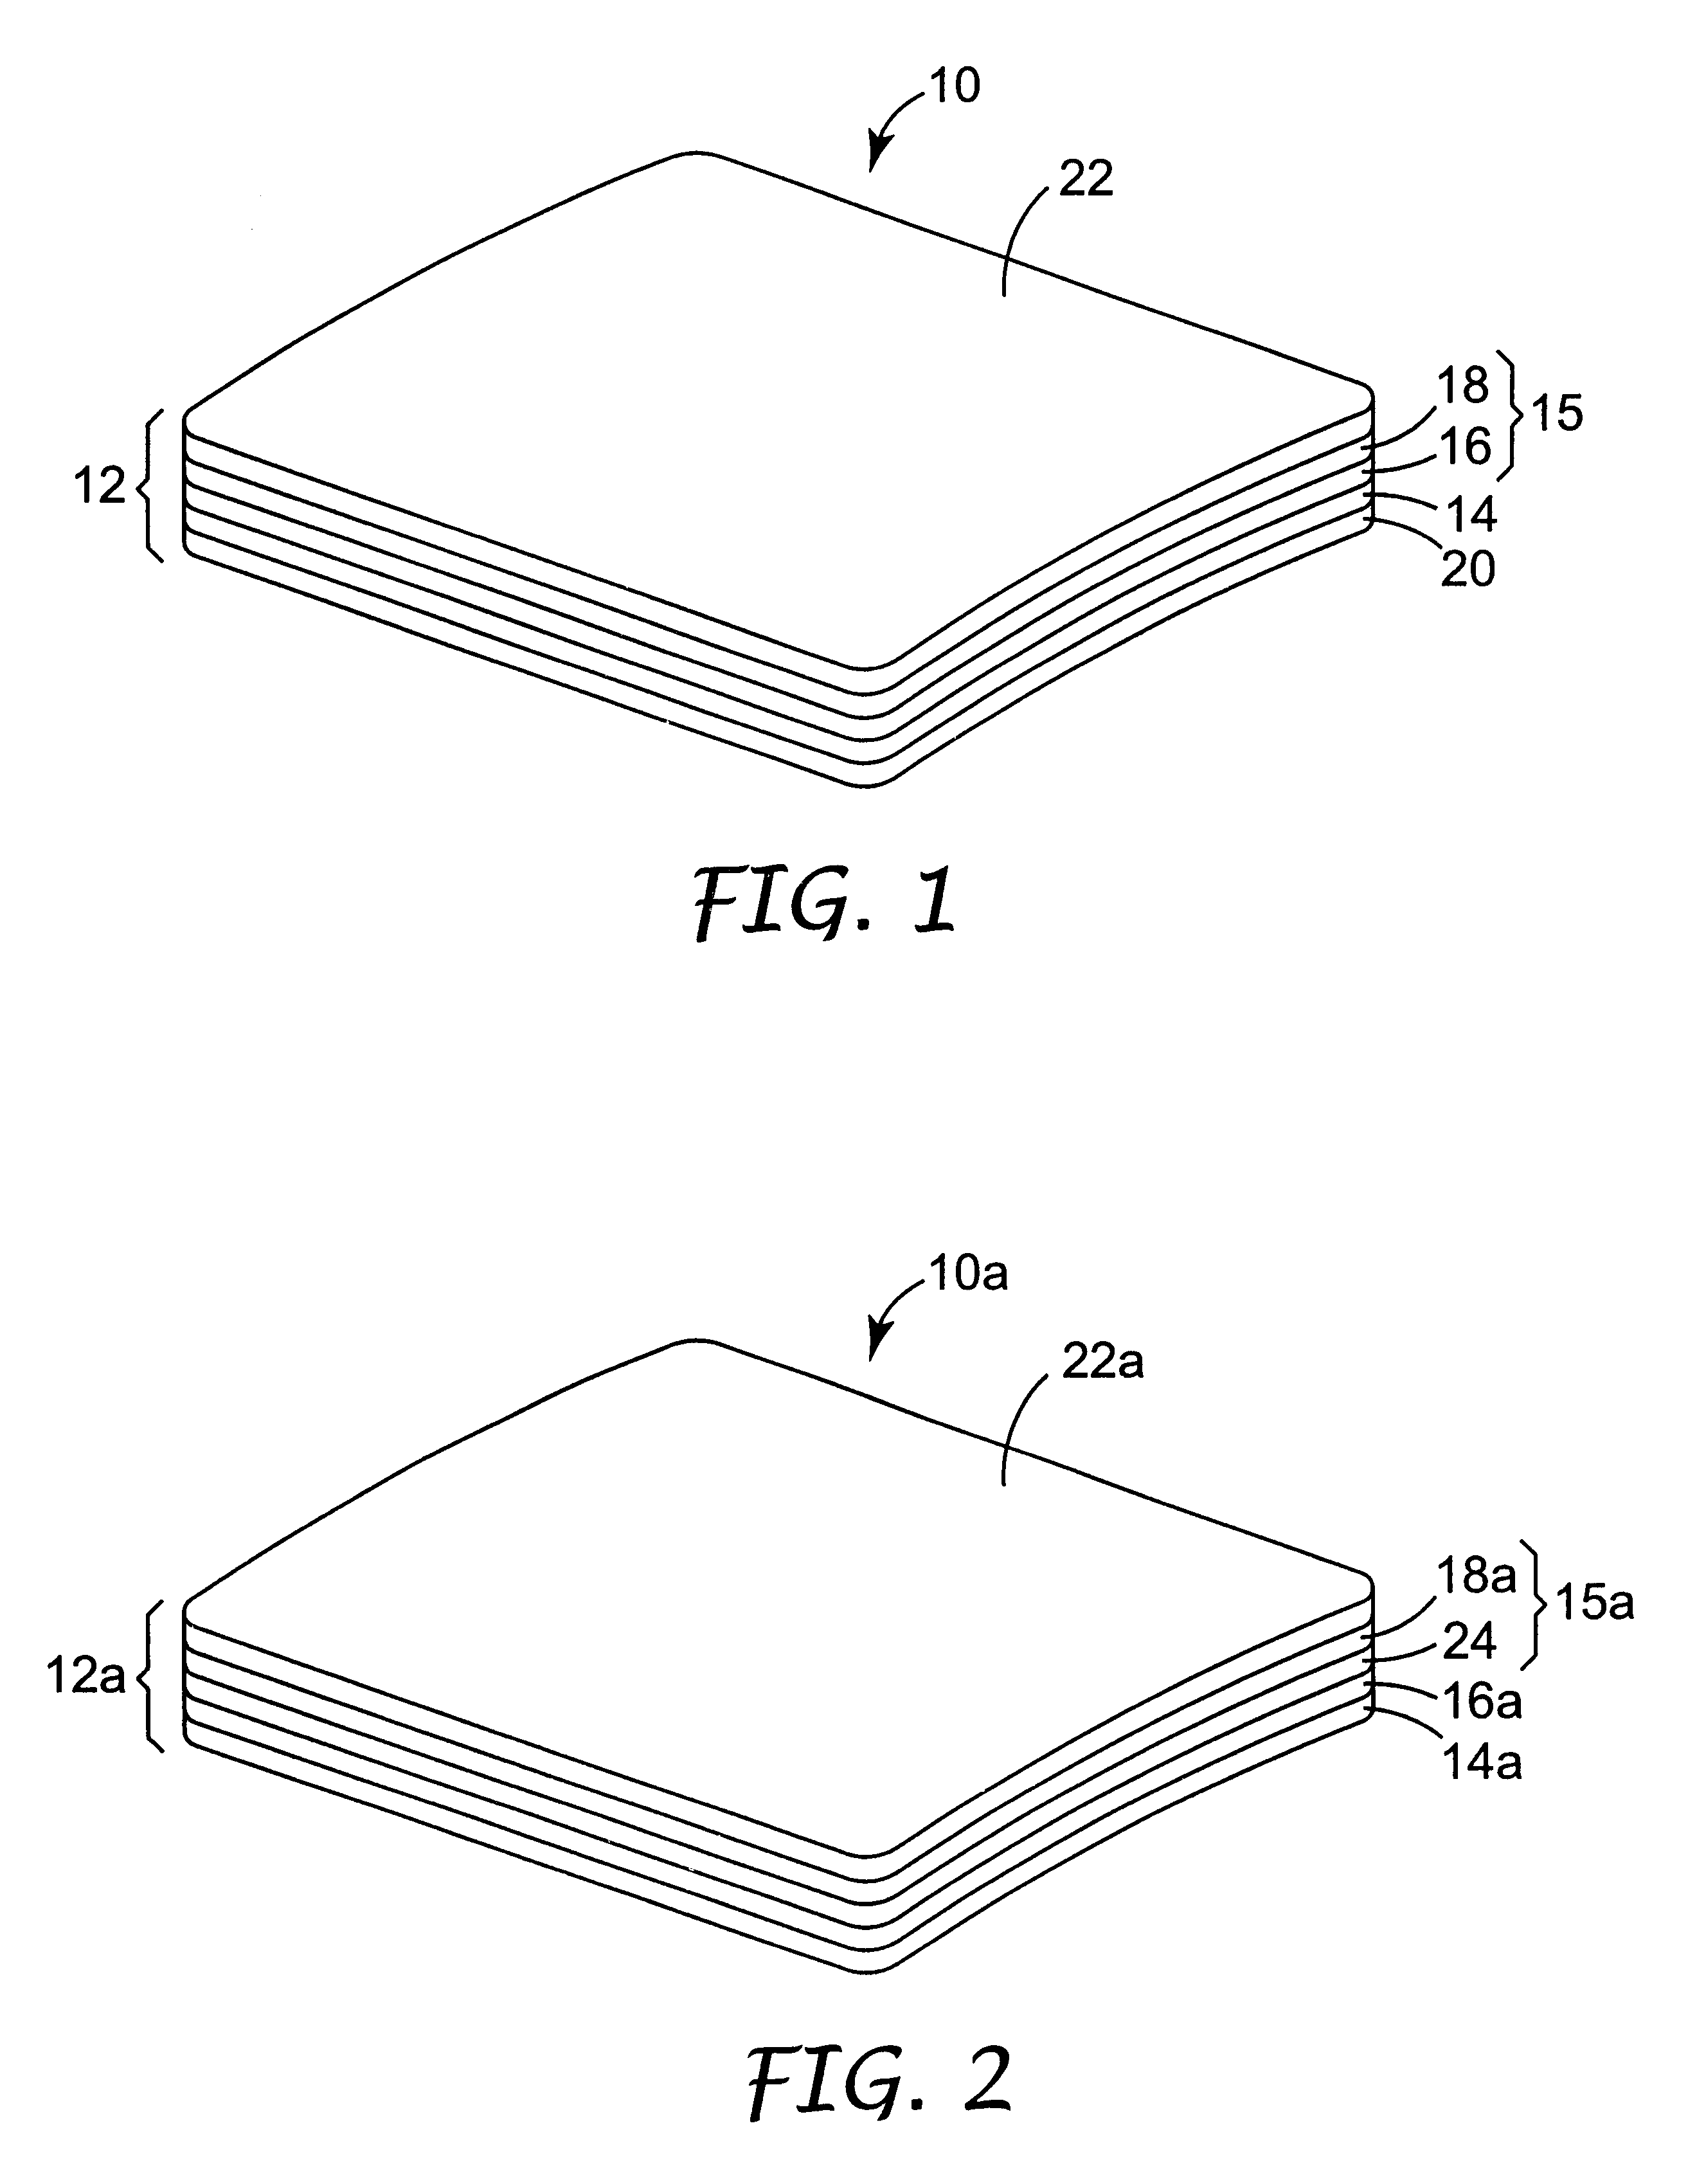 Anti-microbial touch panel and method of making same using homeotropic liquid crystal silanes